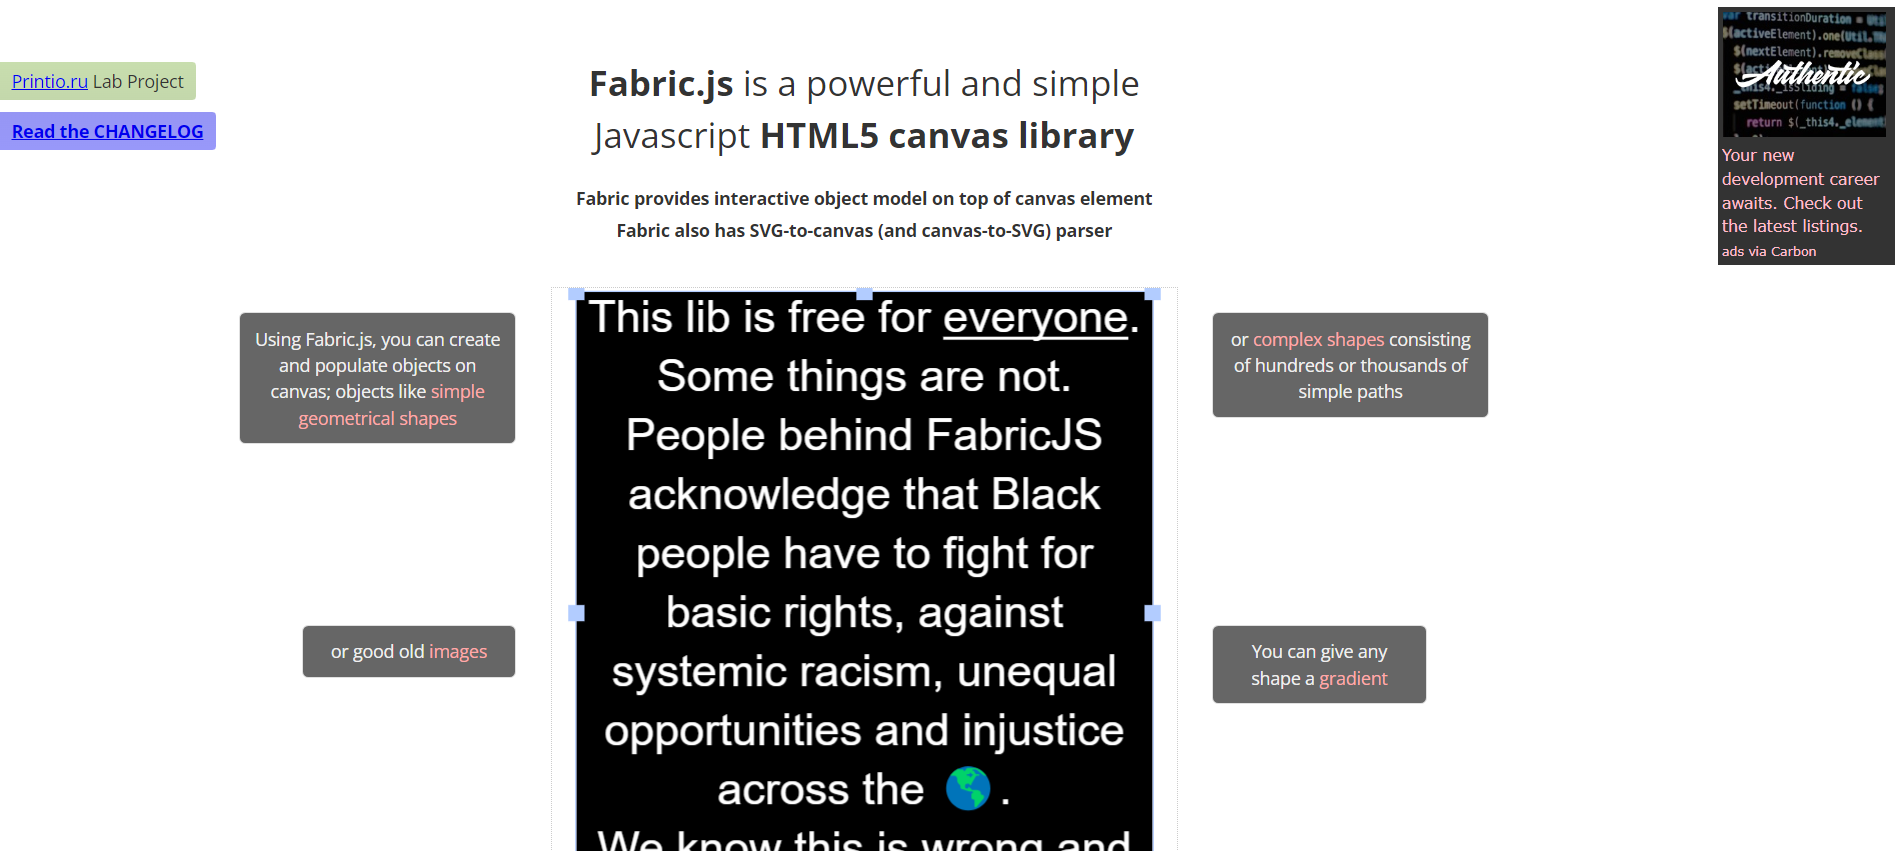 website using Fabric.js, a powerful and simple HTML5 canvas library.